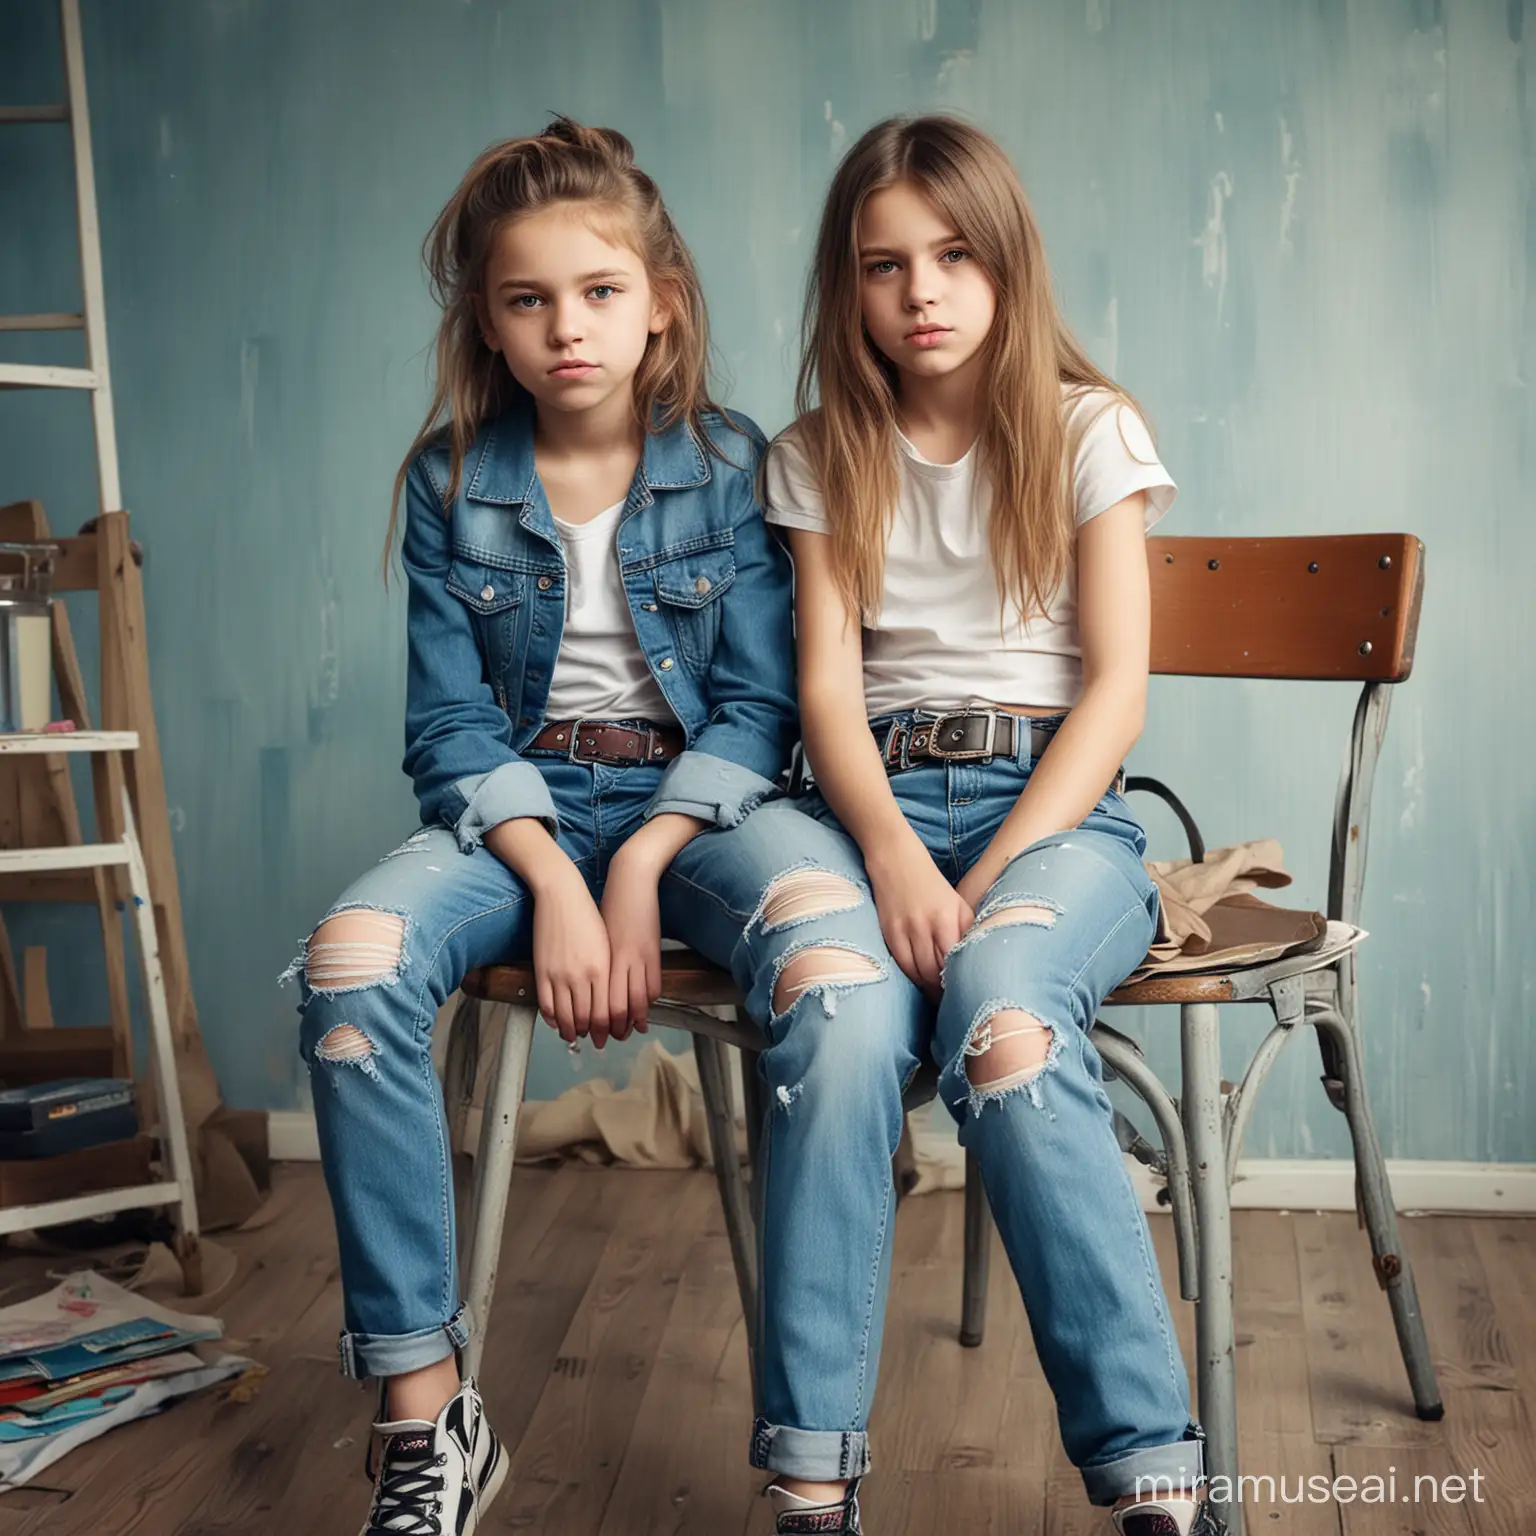 Realistic Portrait of Two Serious Girls Sitting in a Messy Childrens Room